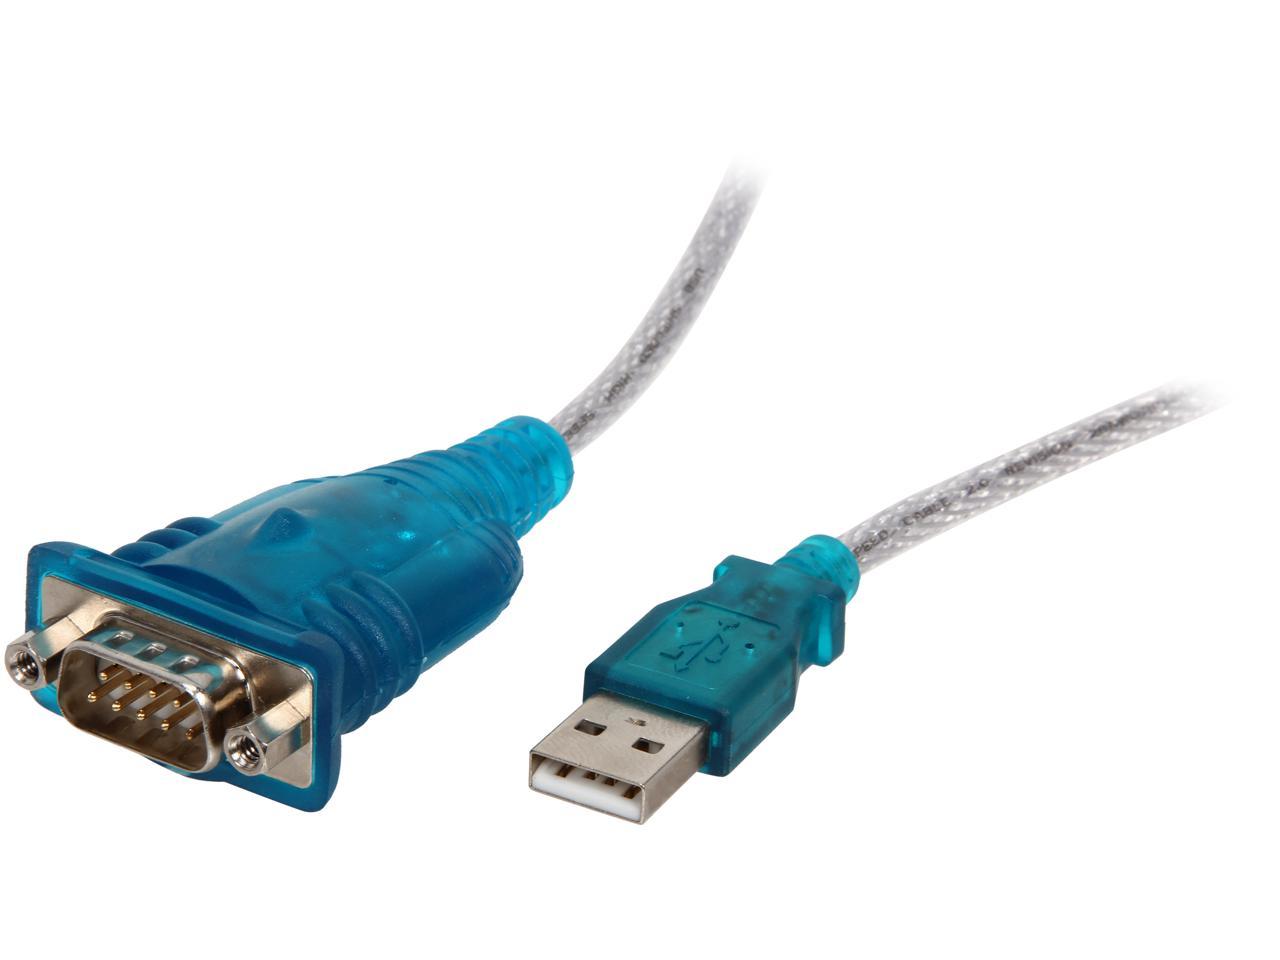 USB to serial adapter cable Prolific chipset Byte Runner brand RS232 5 feet 